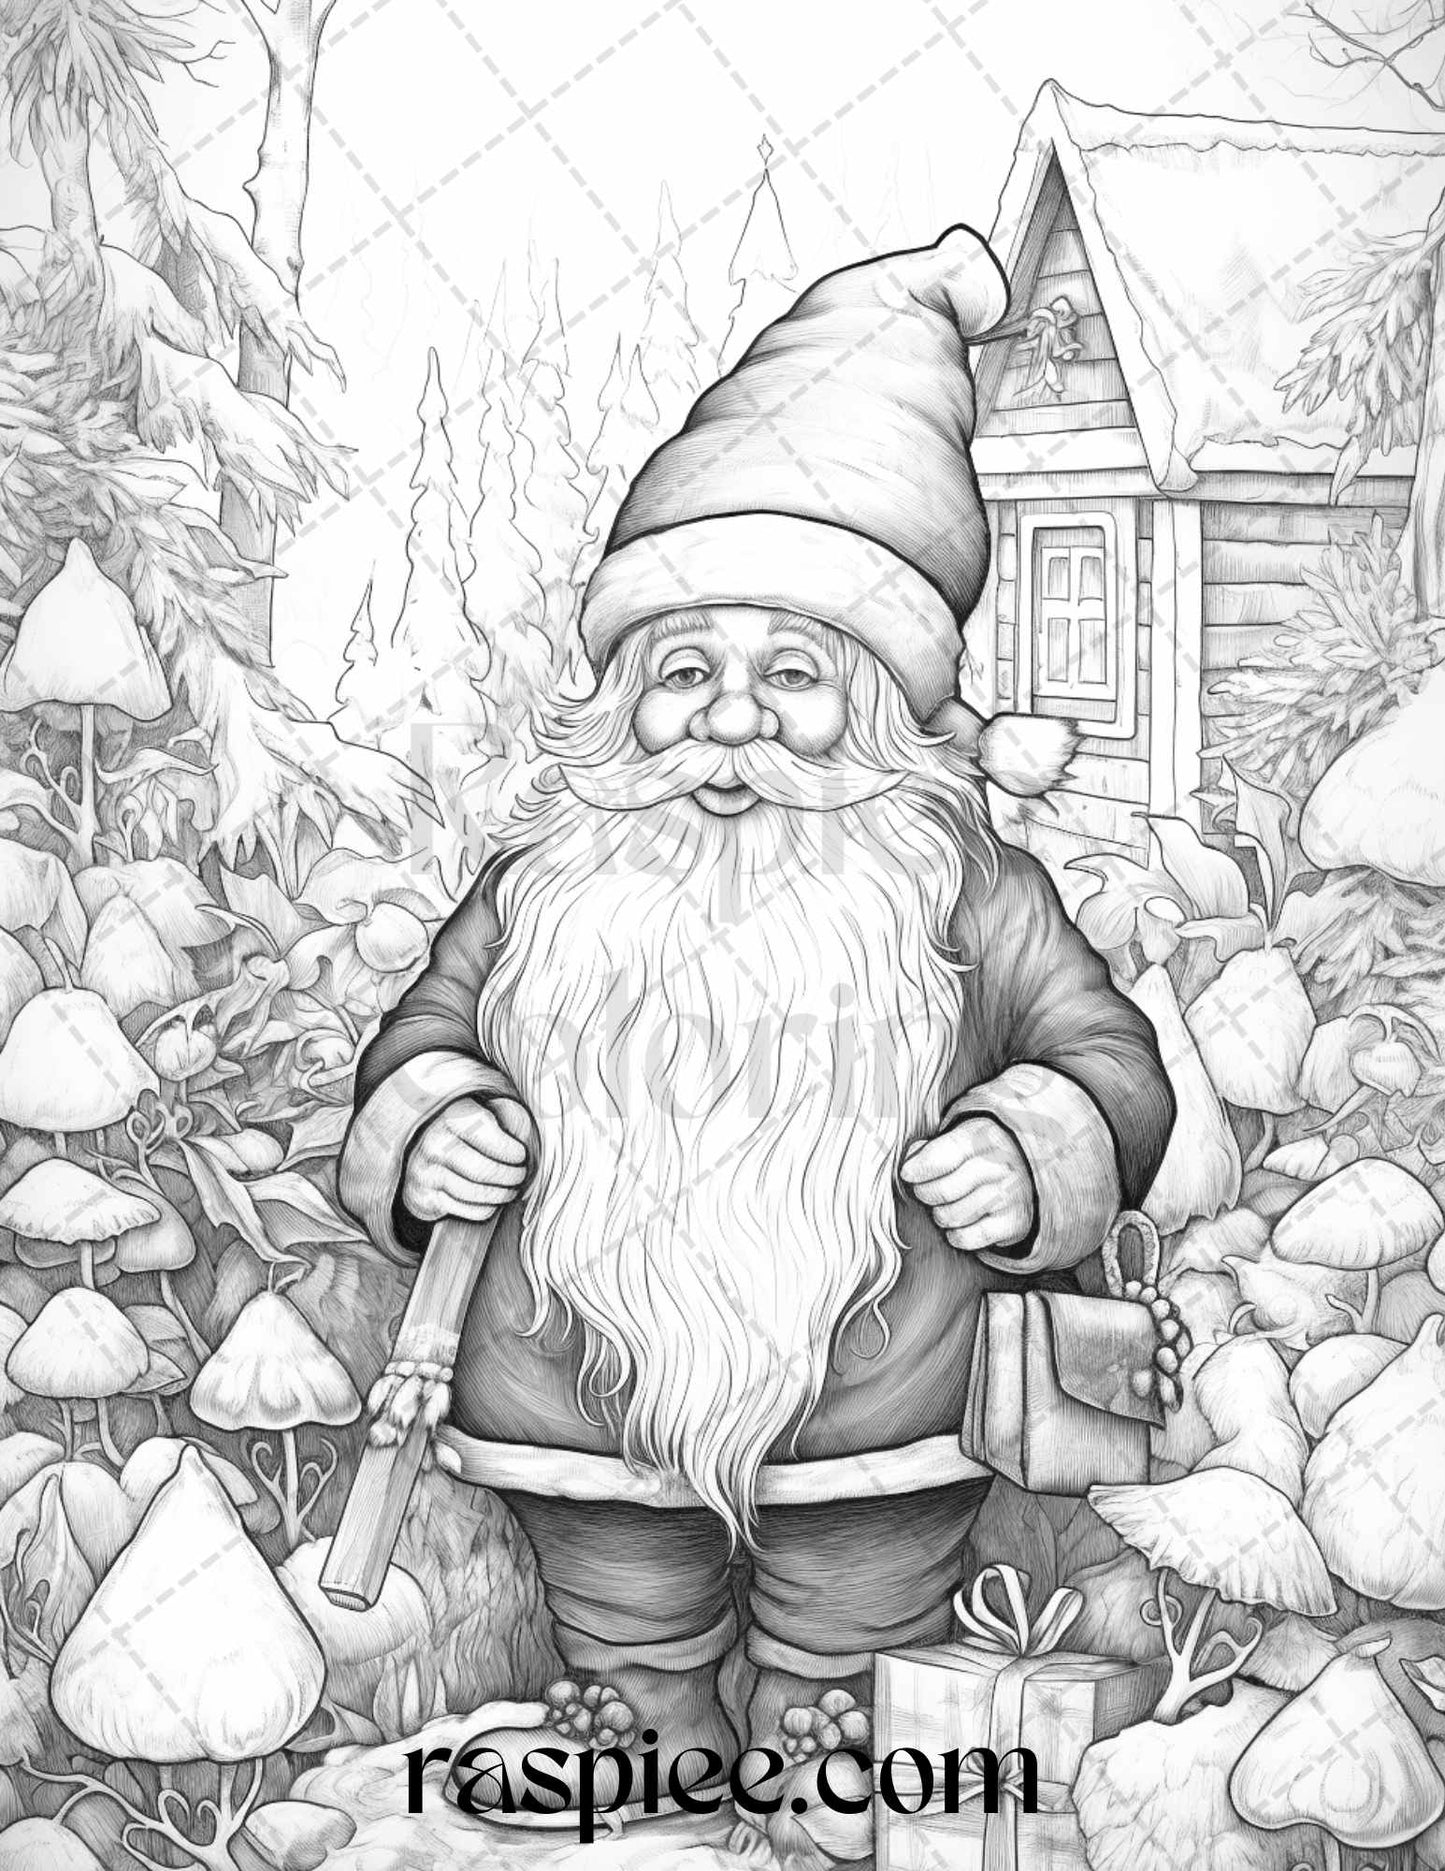 60 Christmas Gnomes Grayscale Coloring Pages Printable for Adults and Kids, PDF File Instant Download